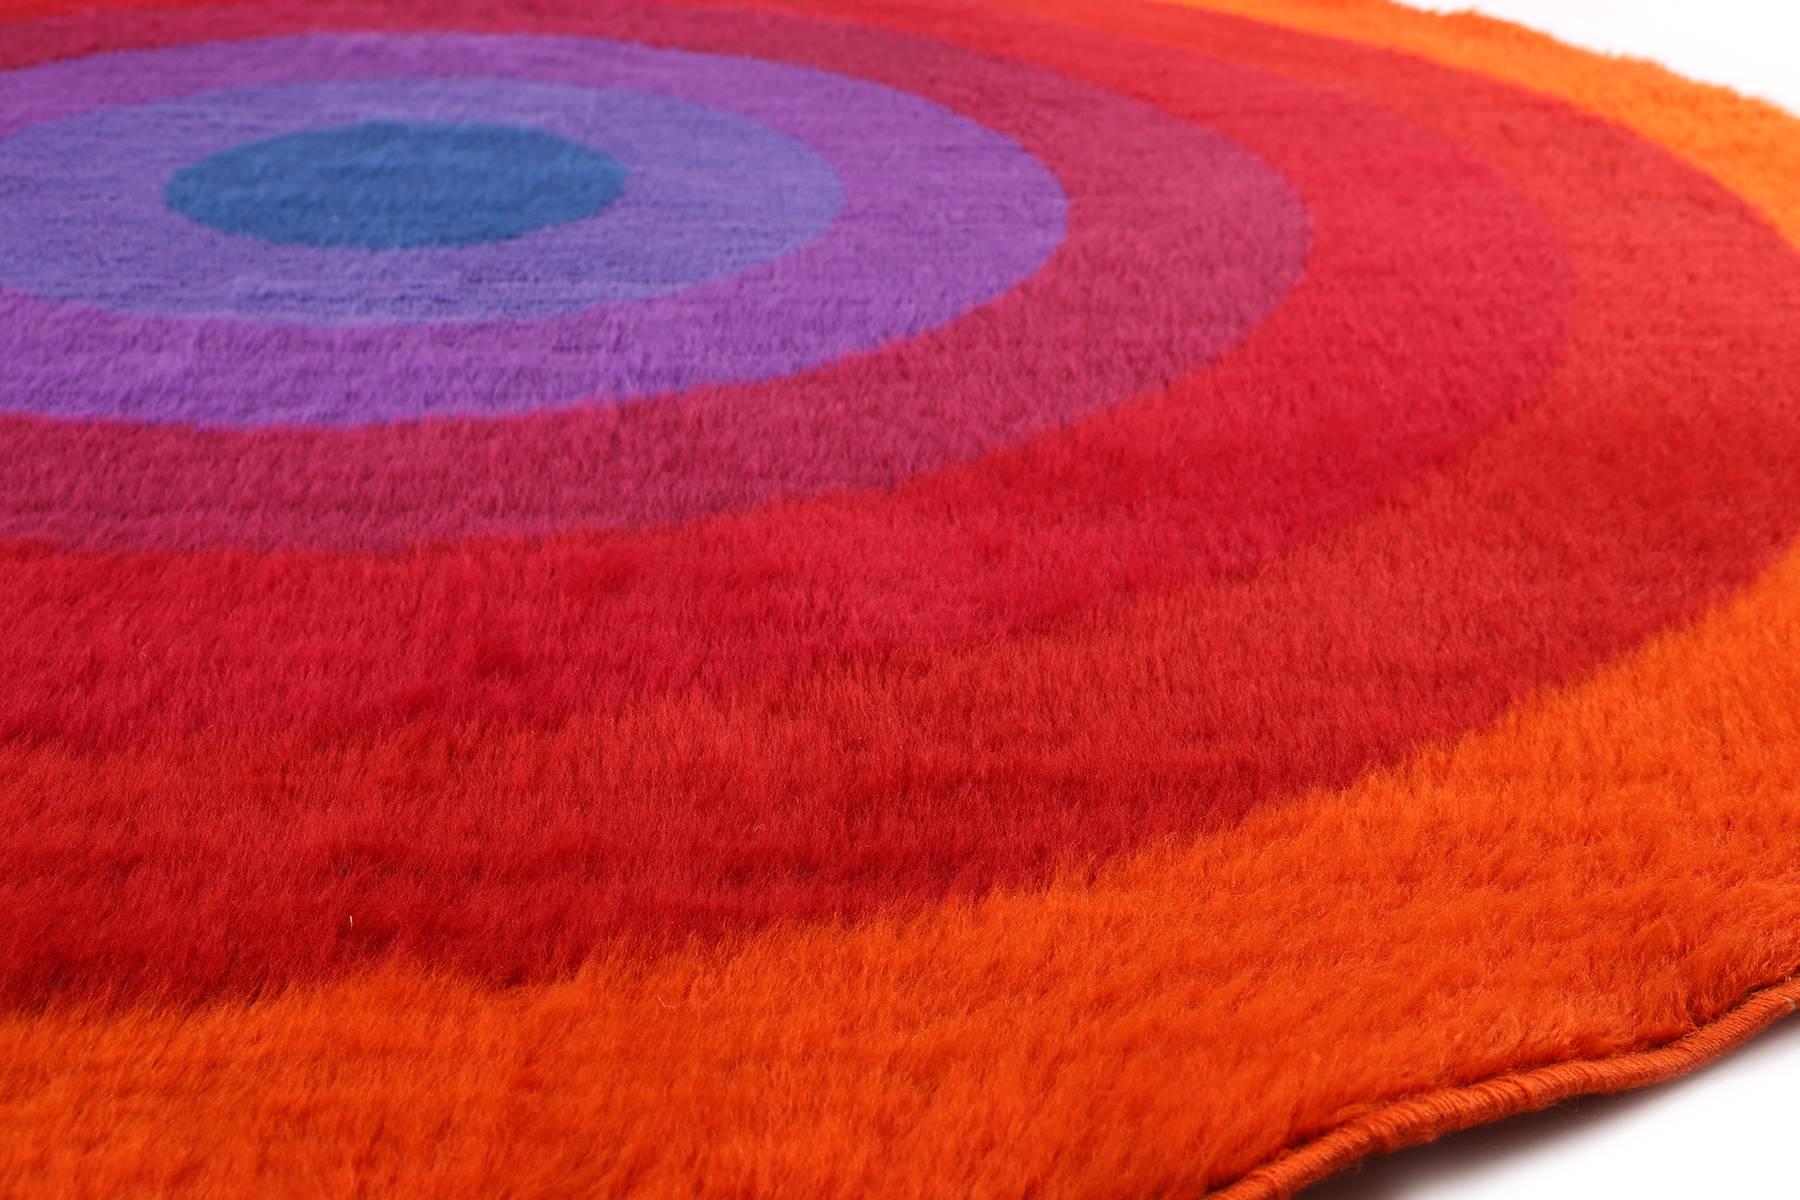 Rare Verner Panton ‘Mira Romantica’ 98″ diameter rug for Mira- X, circa mid-1970s. This all original example is made of wool and incorporates hues of oranges, crimsons, reds and purples. Recently cleaned the colors truly pop.